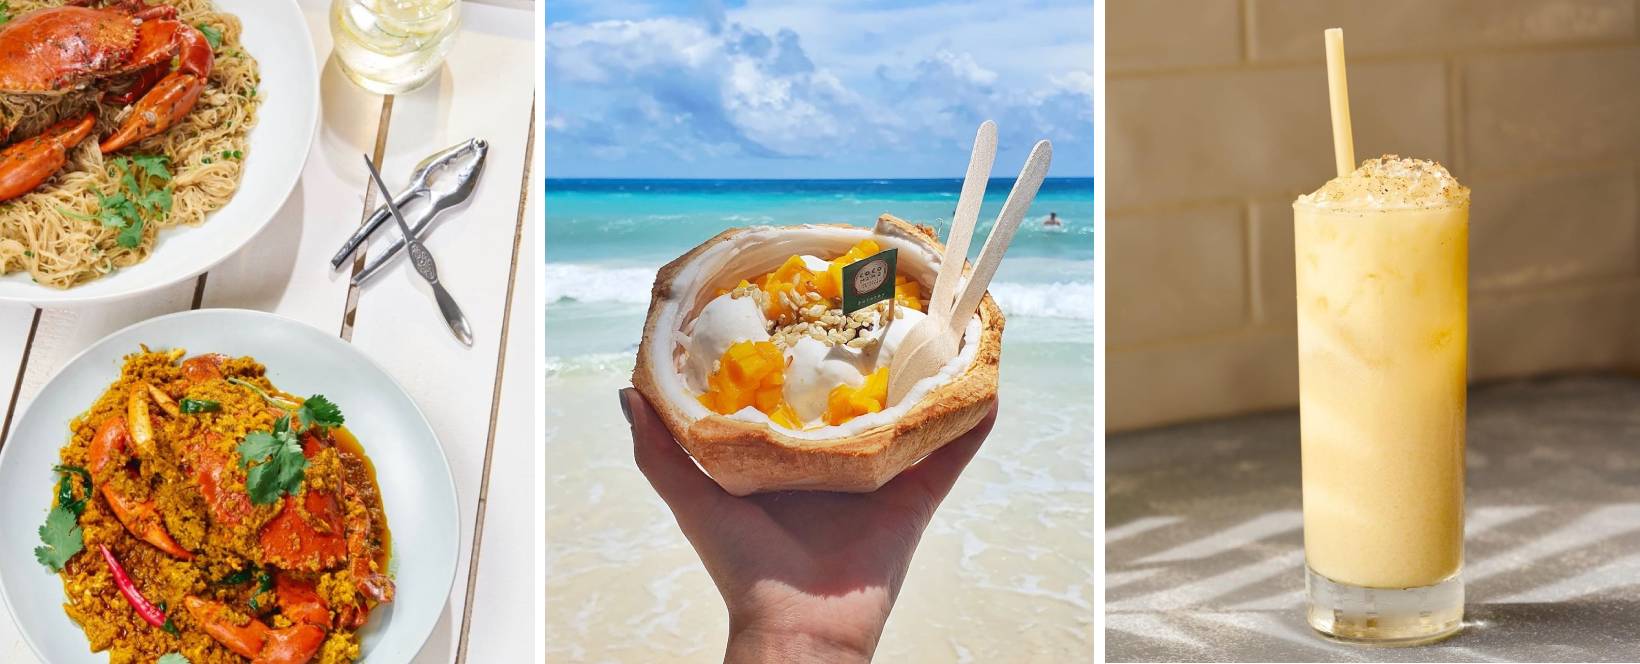 7 Must-Visit Places in the Philippines - Boracay - Percy Seafood, Cocomama, and Hello Sailor